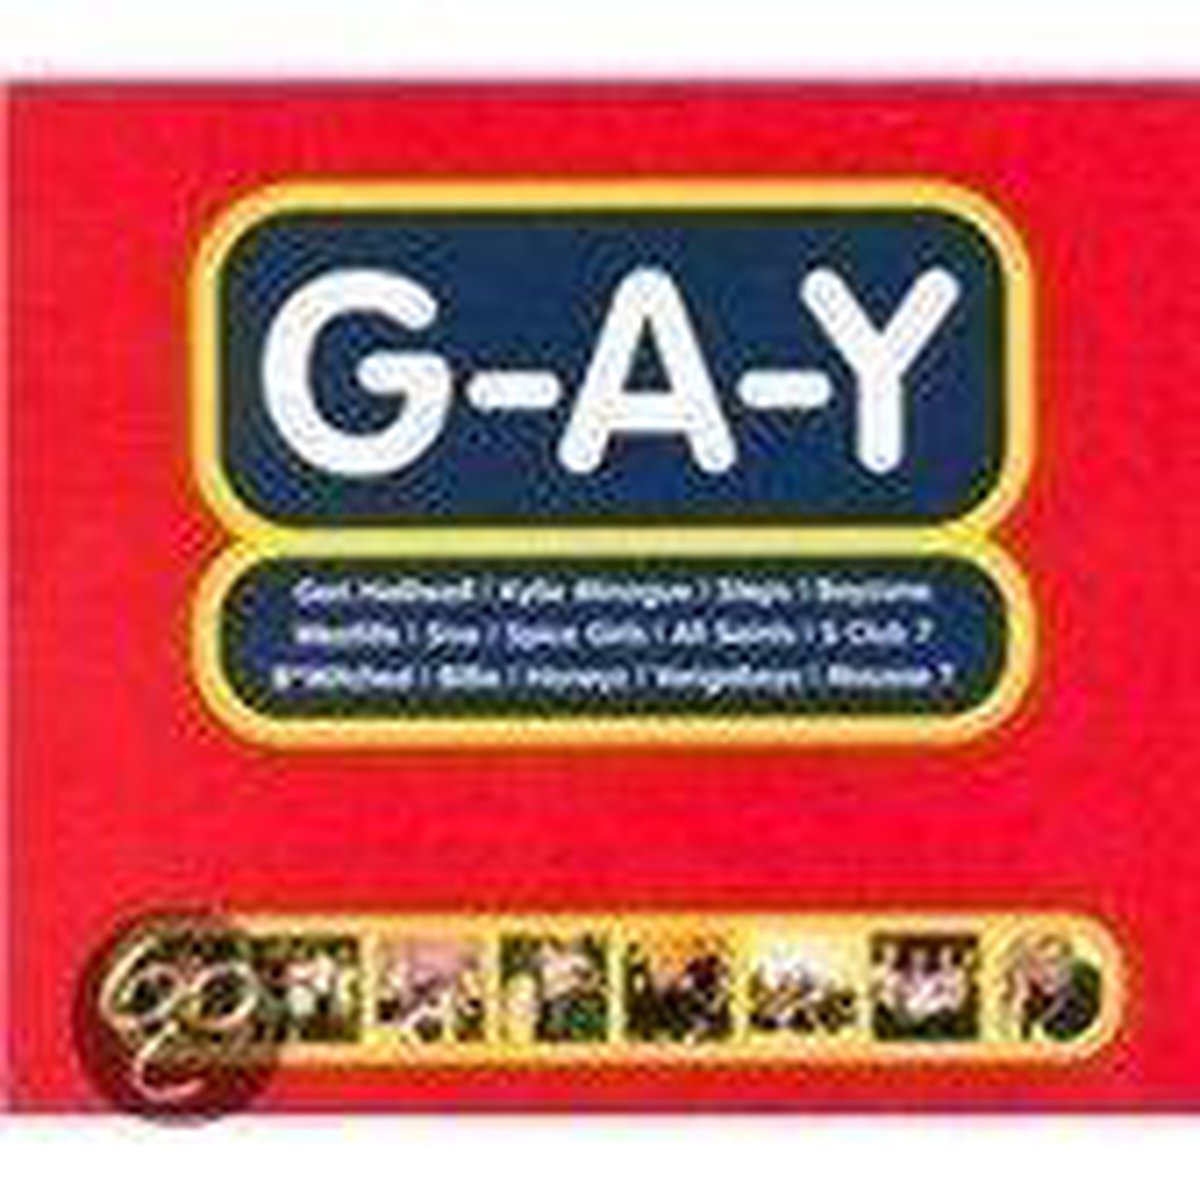 G-A-Y - various artists